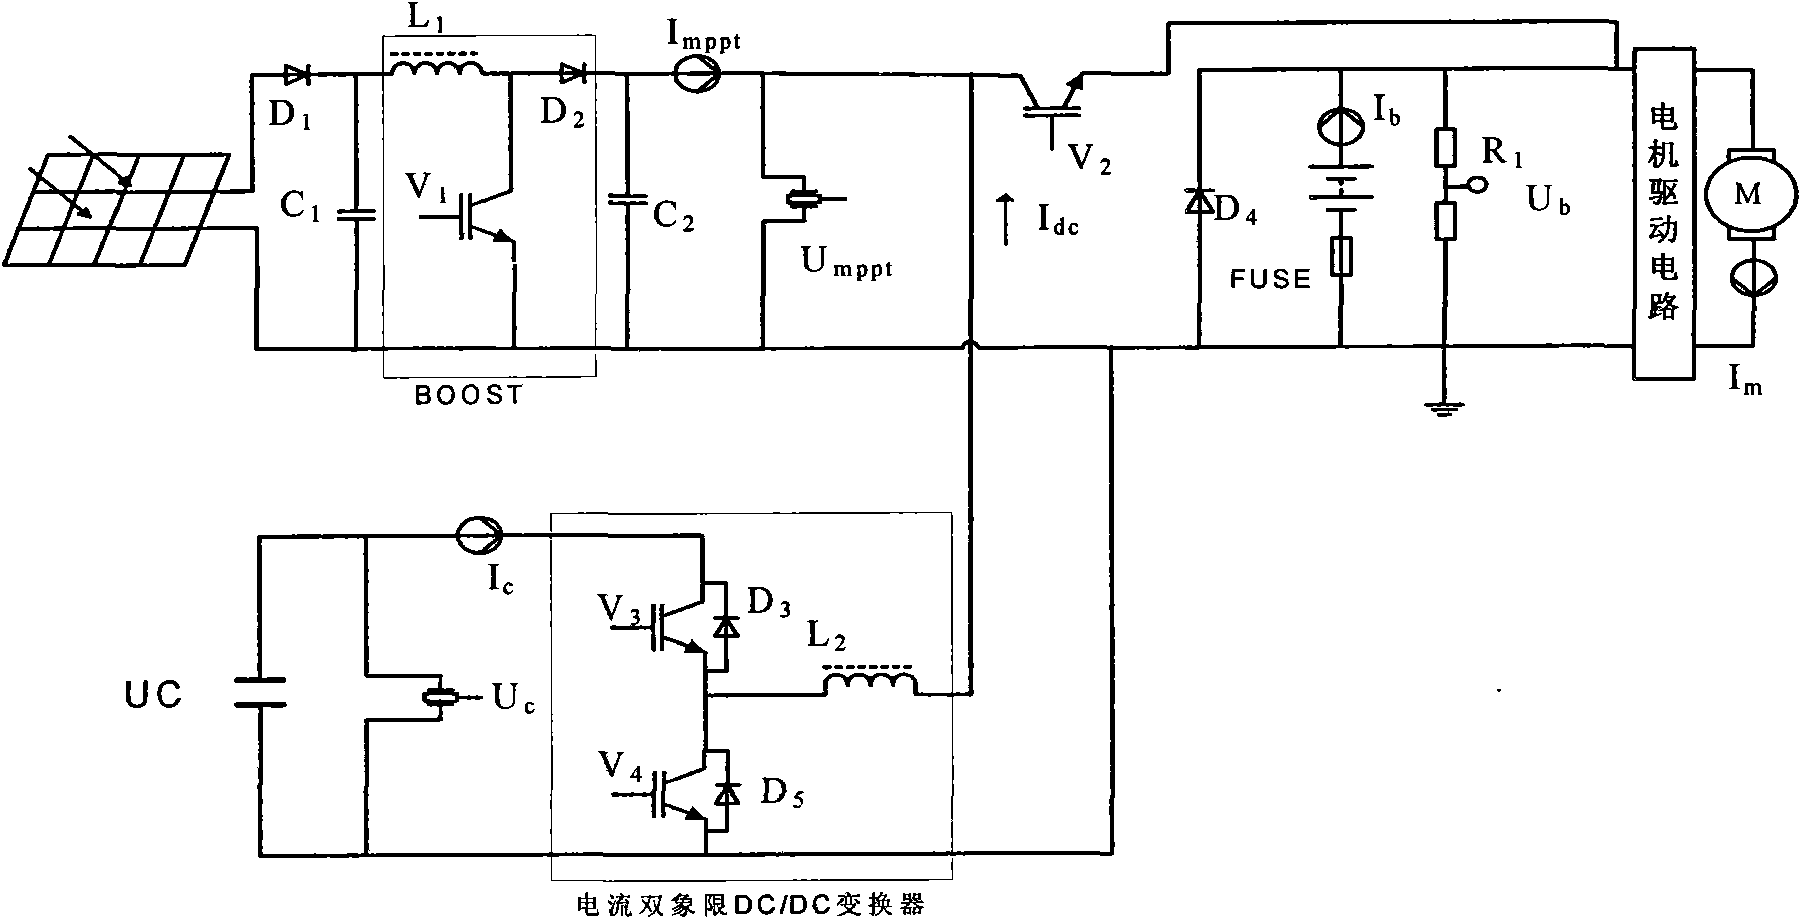 Power system of compound energy electro-vehicle